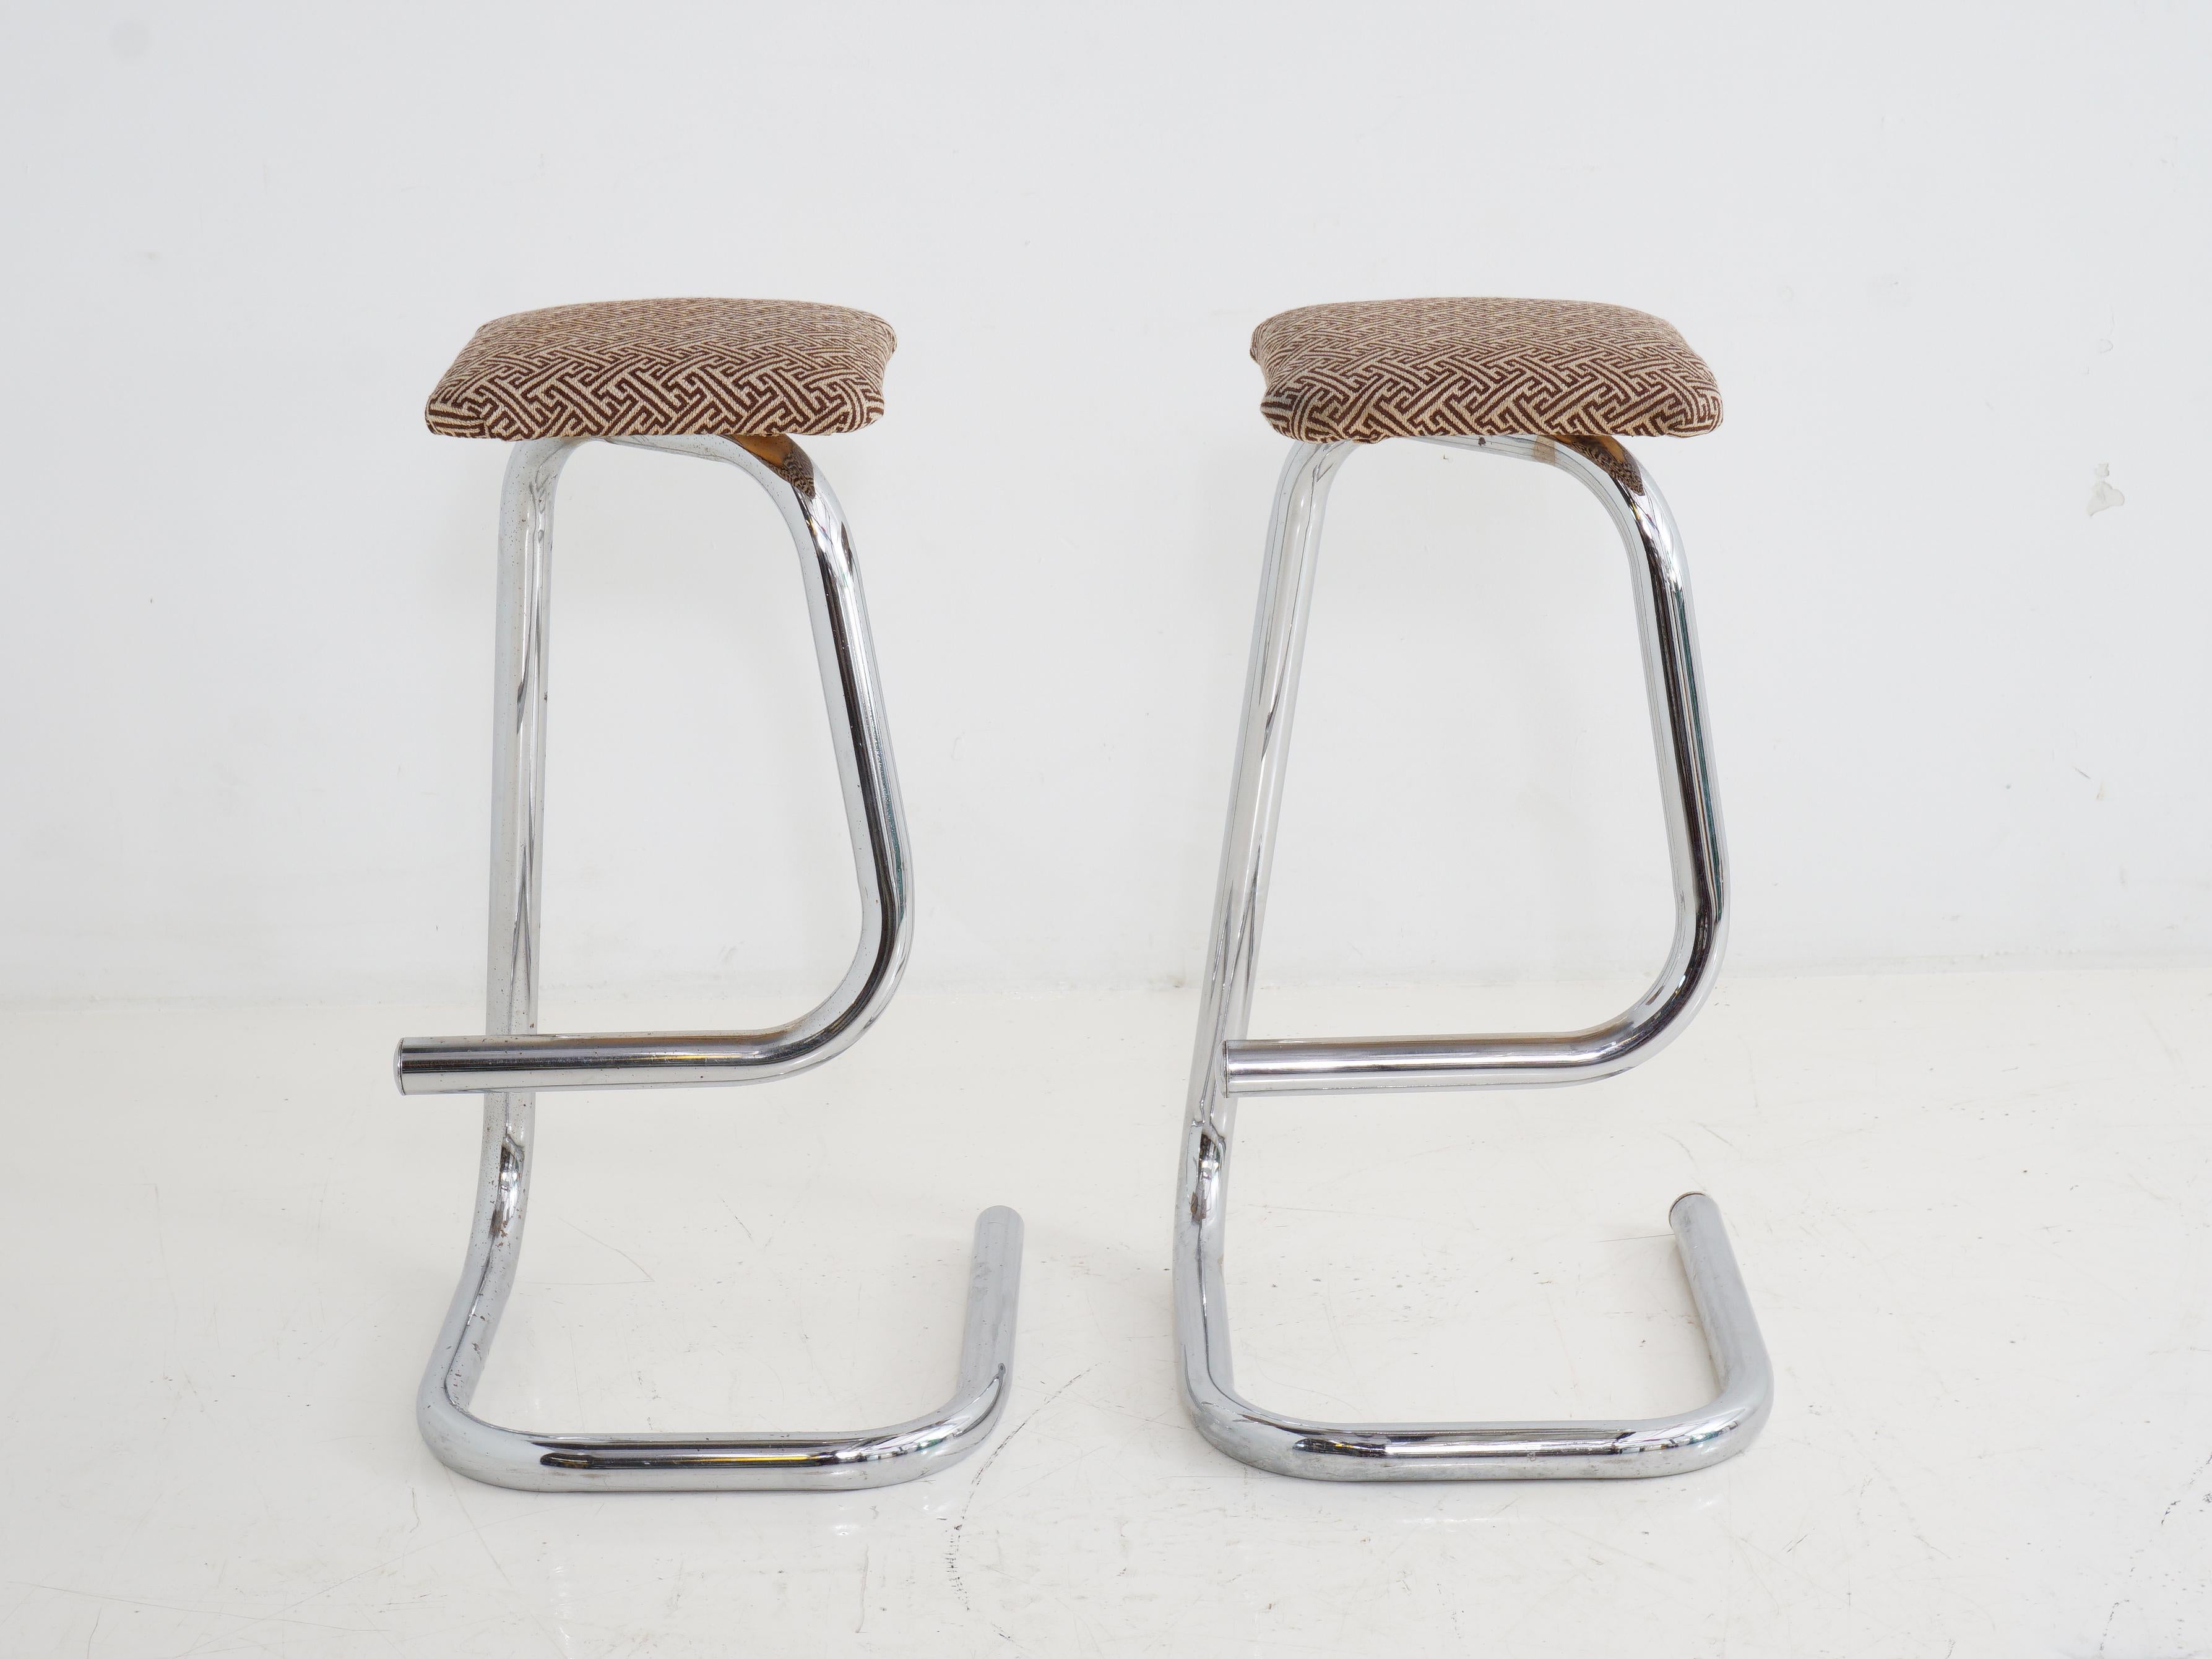 It's the charismatic twist your seating's been craving! Designed to add a playful pop to your space, this stool is like a cheeky nod to your sense of style. The chrome finish takes the classic paperclip to new heights, making it the coolest seat in